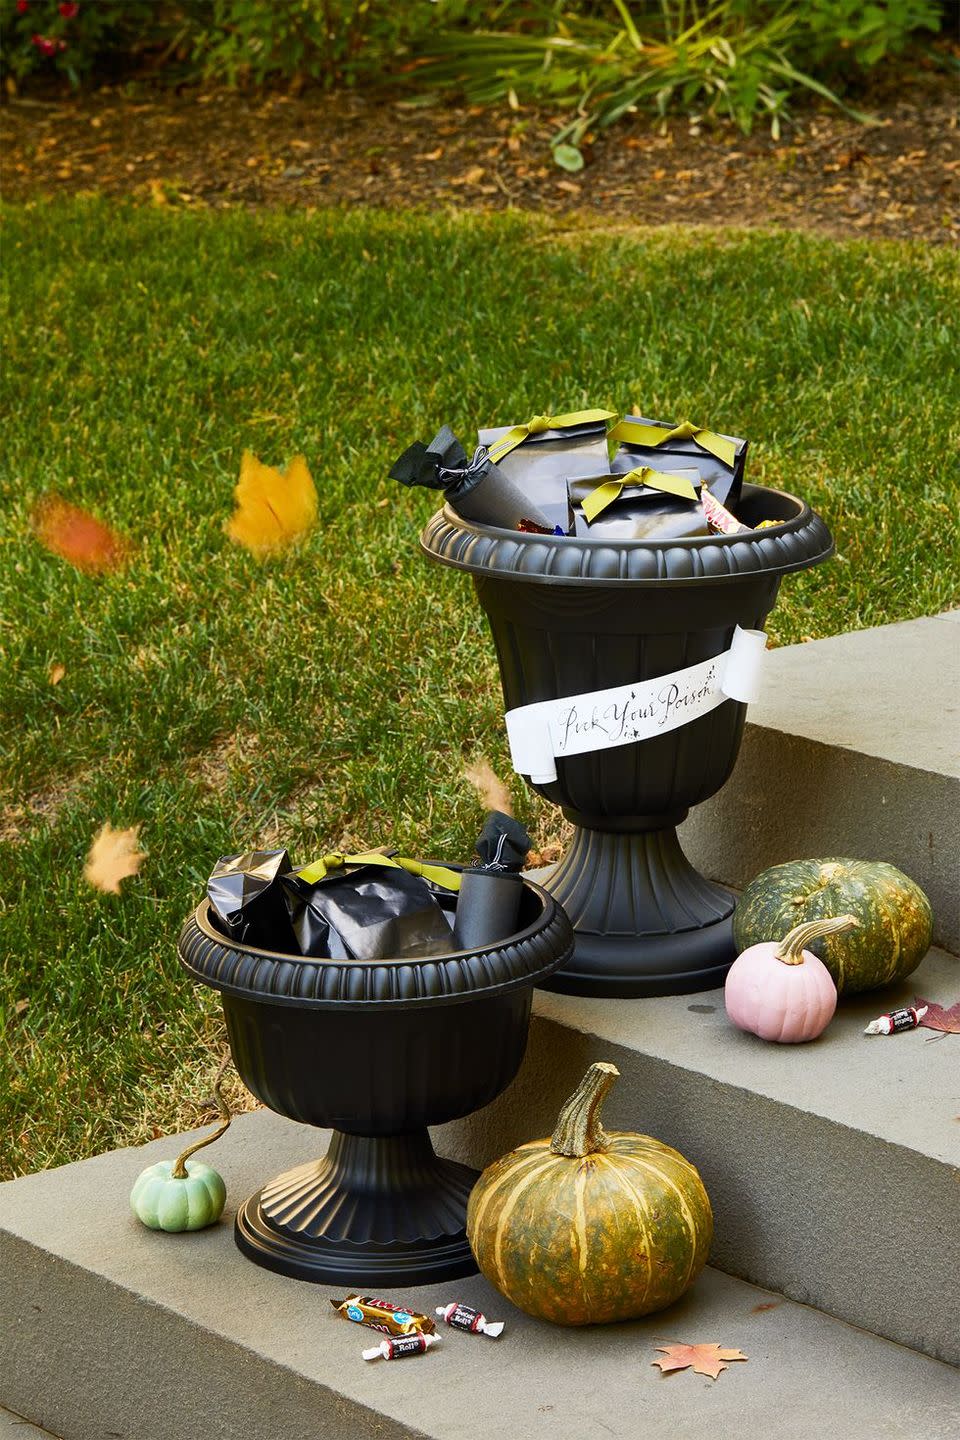 8) Candy Urns